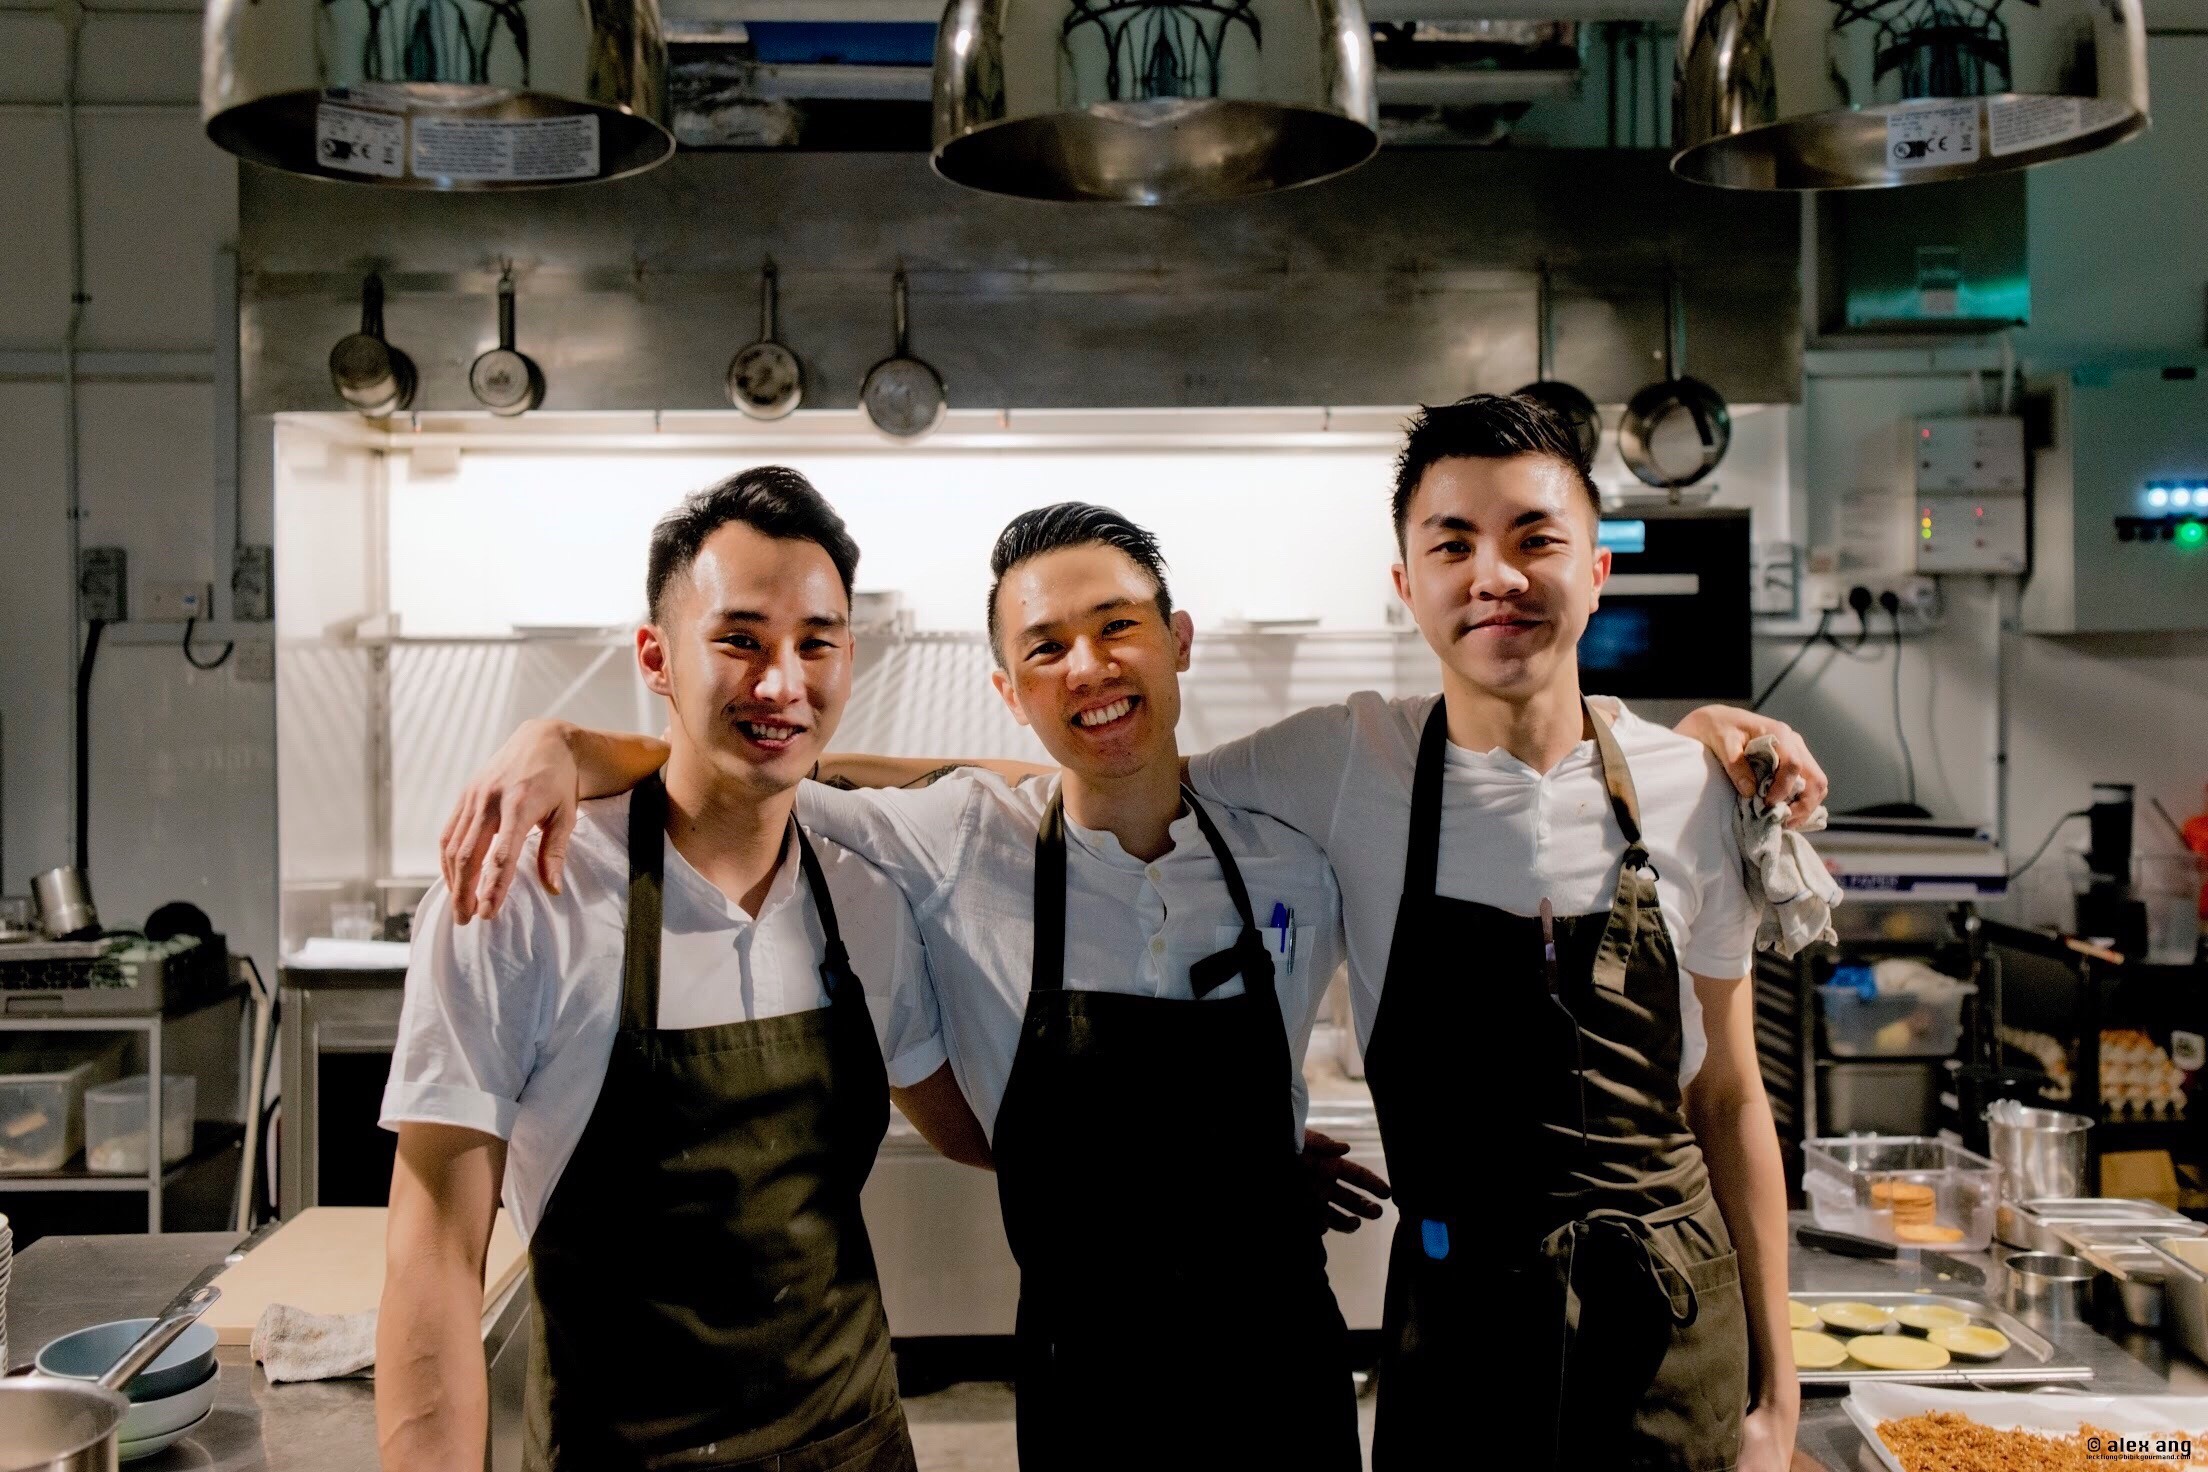 Magic Square's under-30 chefs (from left) Desmond Shen, Abel Su, and Marcus Leow have impressed Singapore diners with their world-class menus.